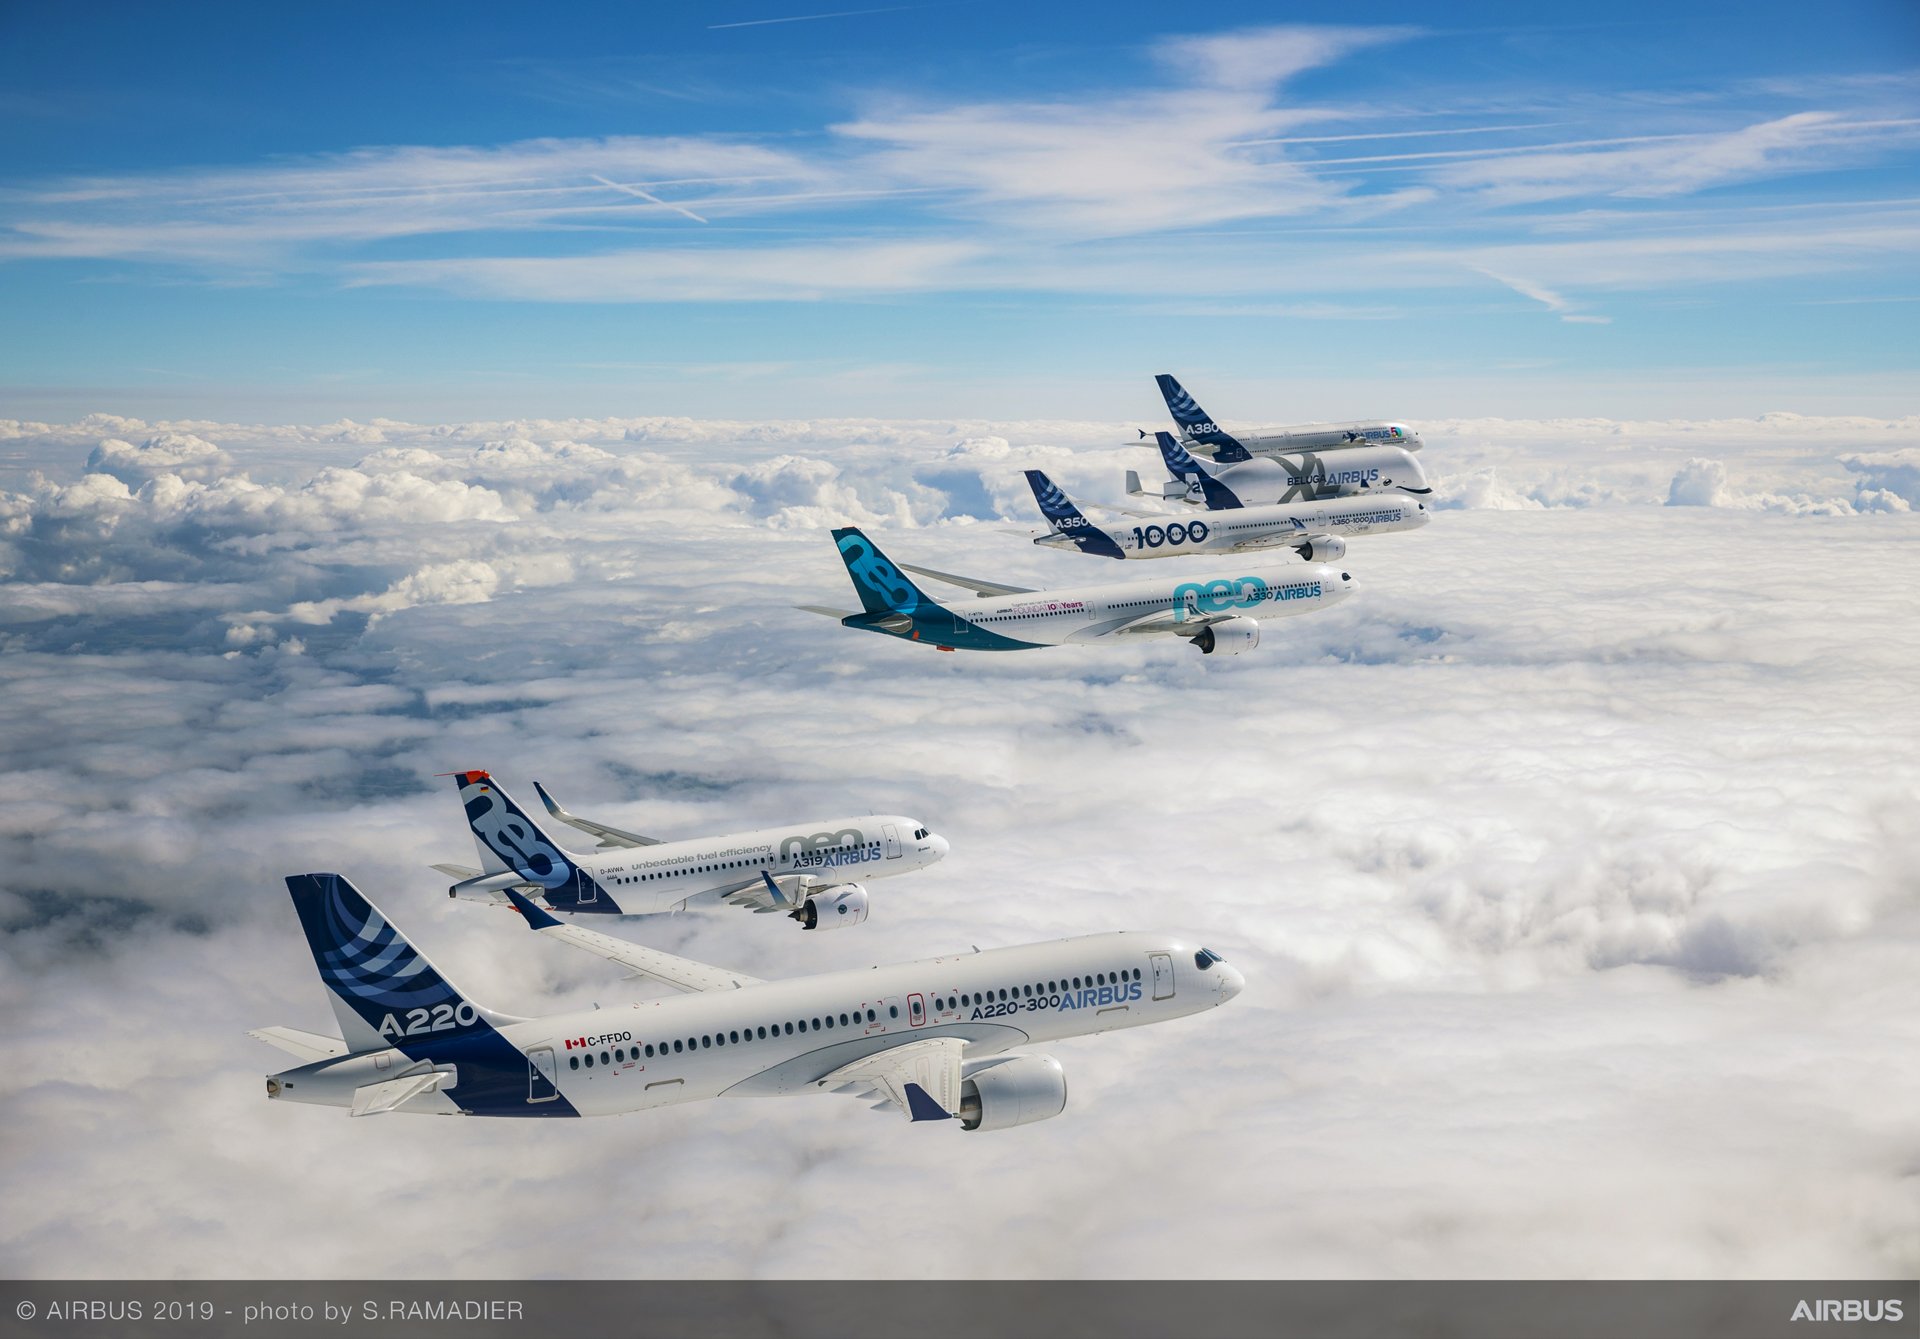 First Year Of Airbus Leading The A220 Program A Great